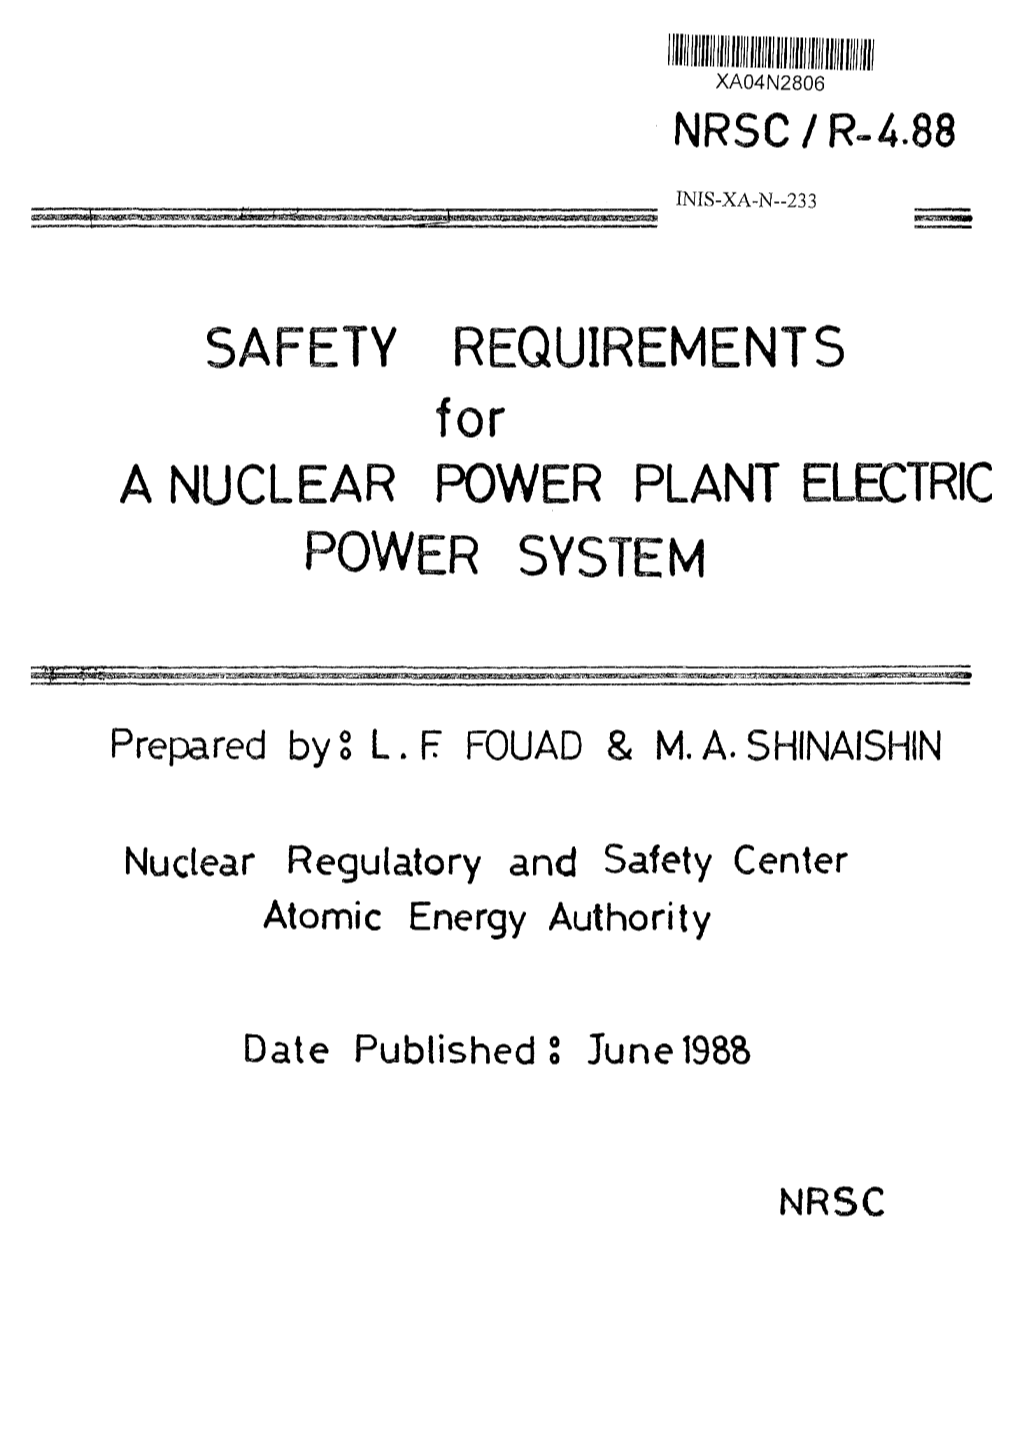 SAFETY REQUIREMENTS for a NUCLEAR POWER PLANT ELECTRIC POWER SYSTEM